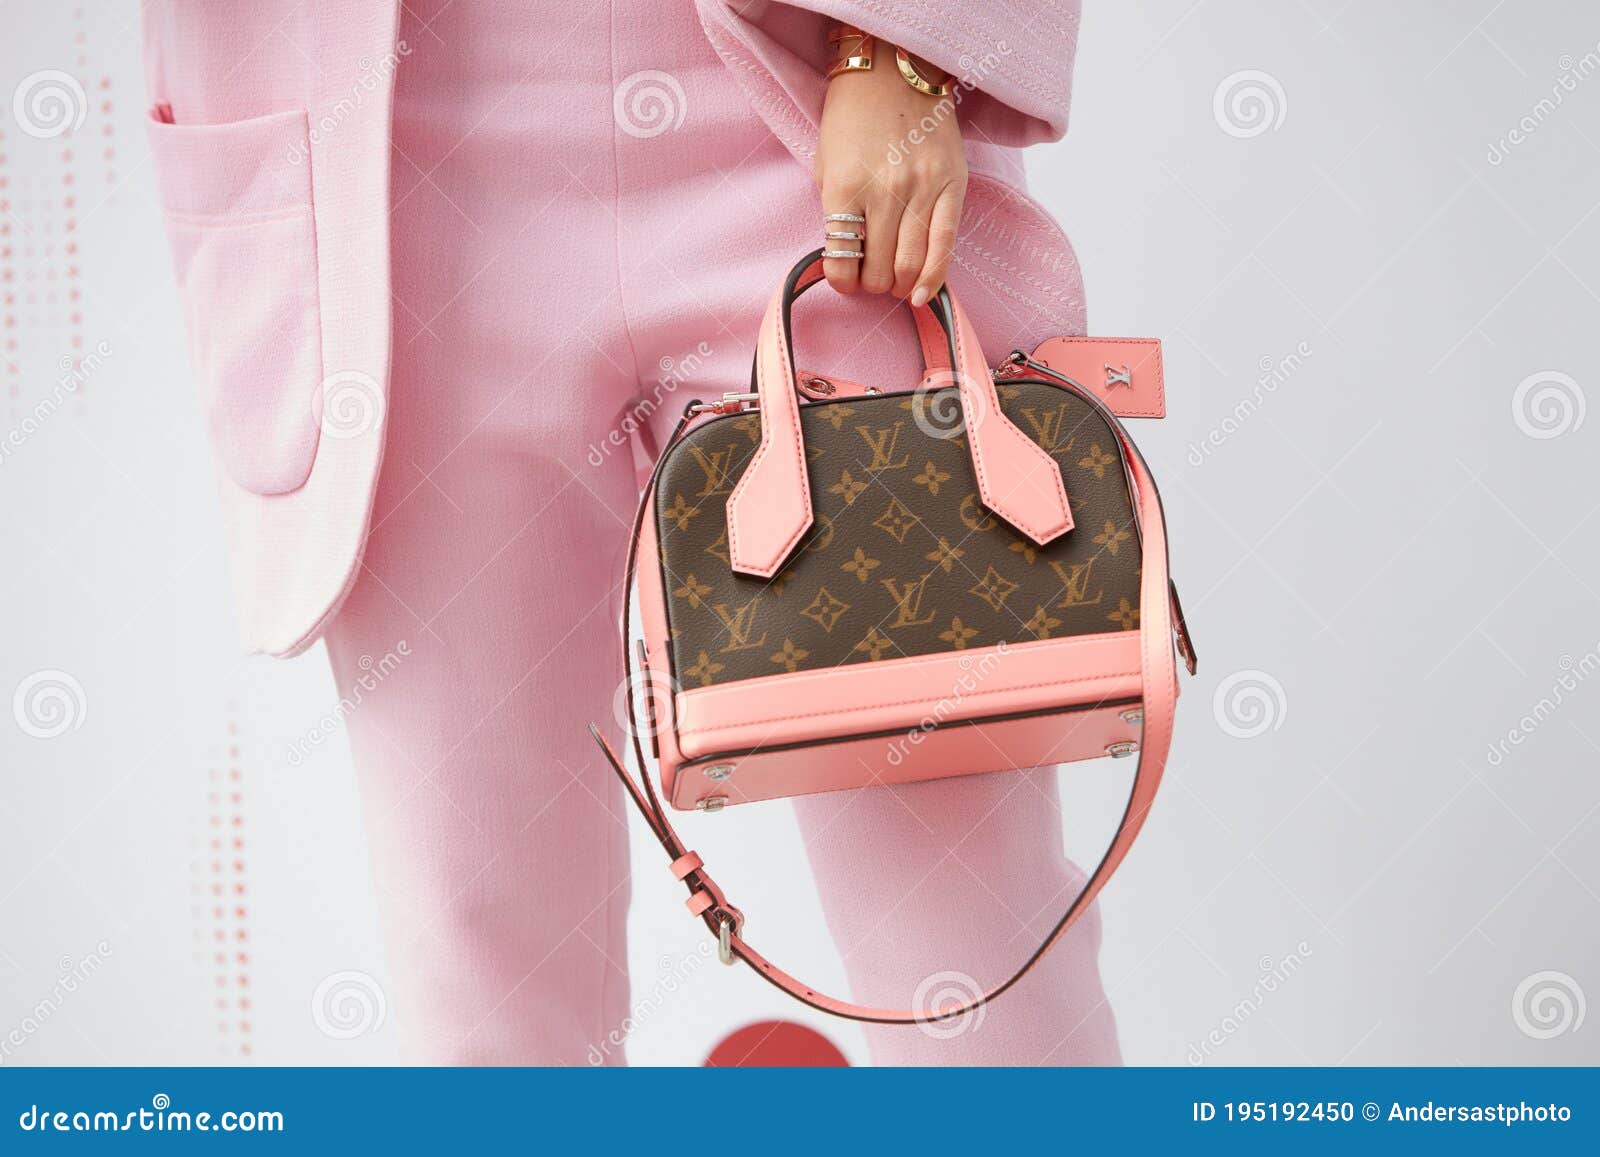 Woman Poses for Photographers with Pink and Brown Louis Vuitton